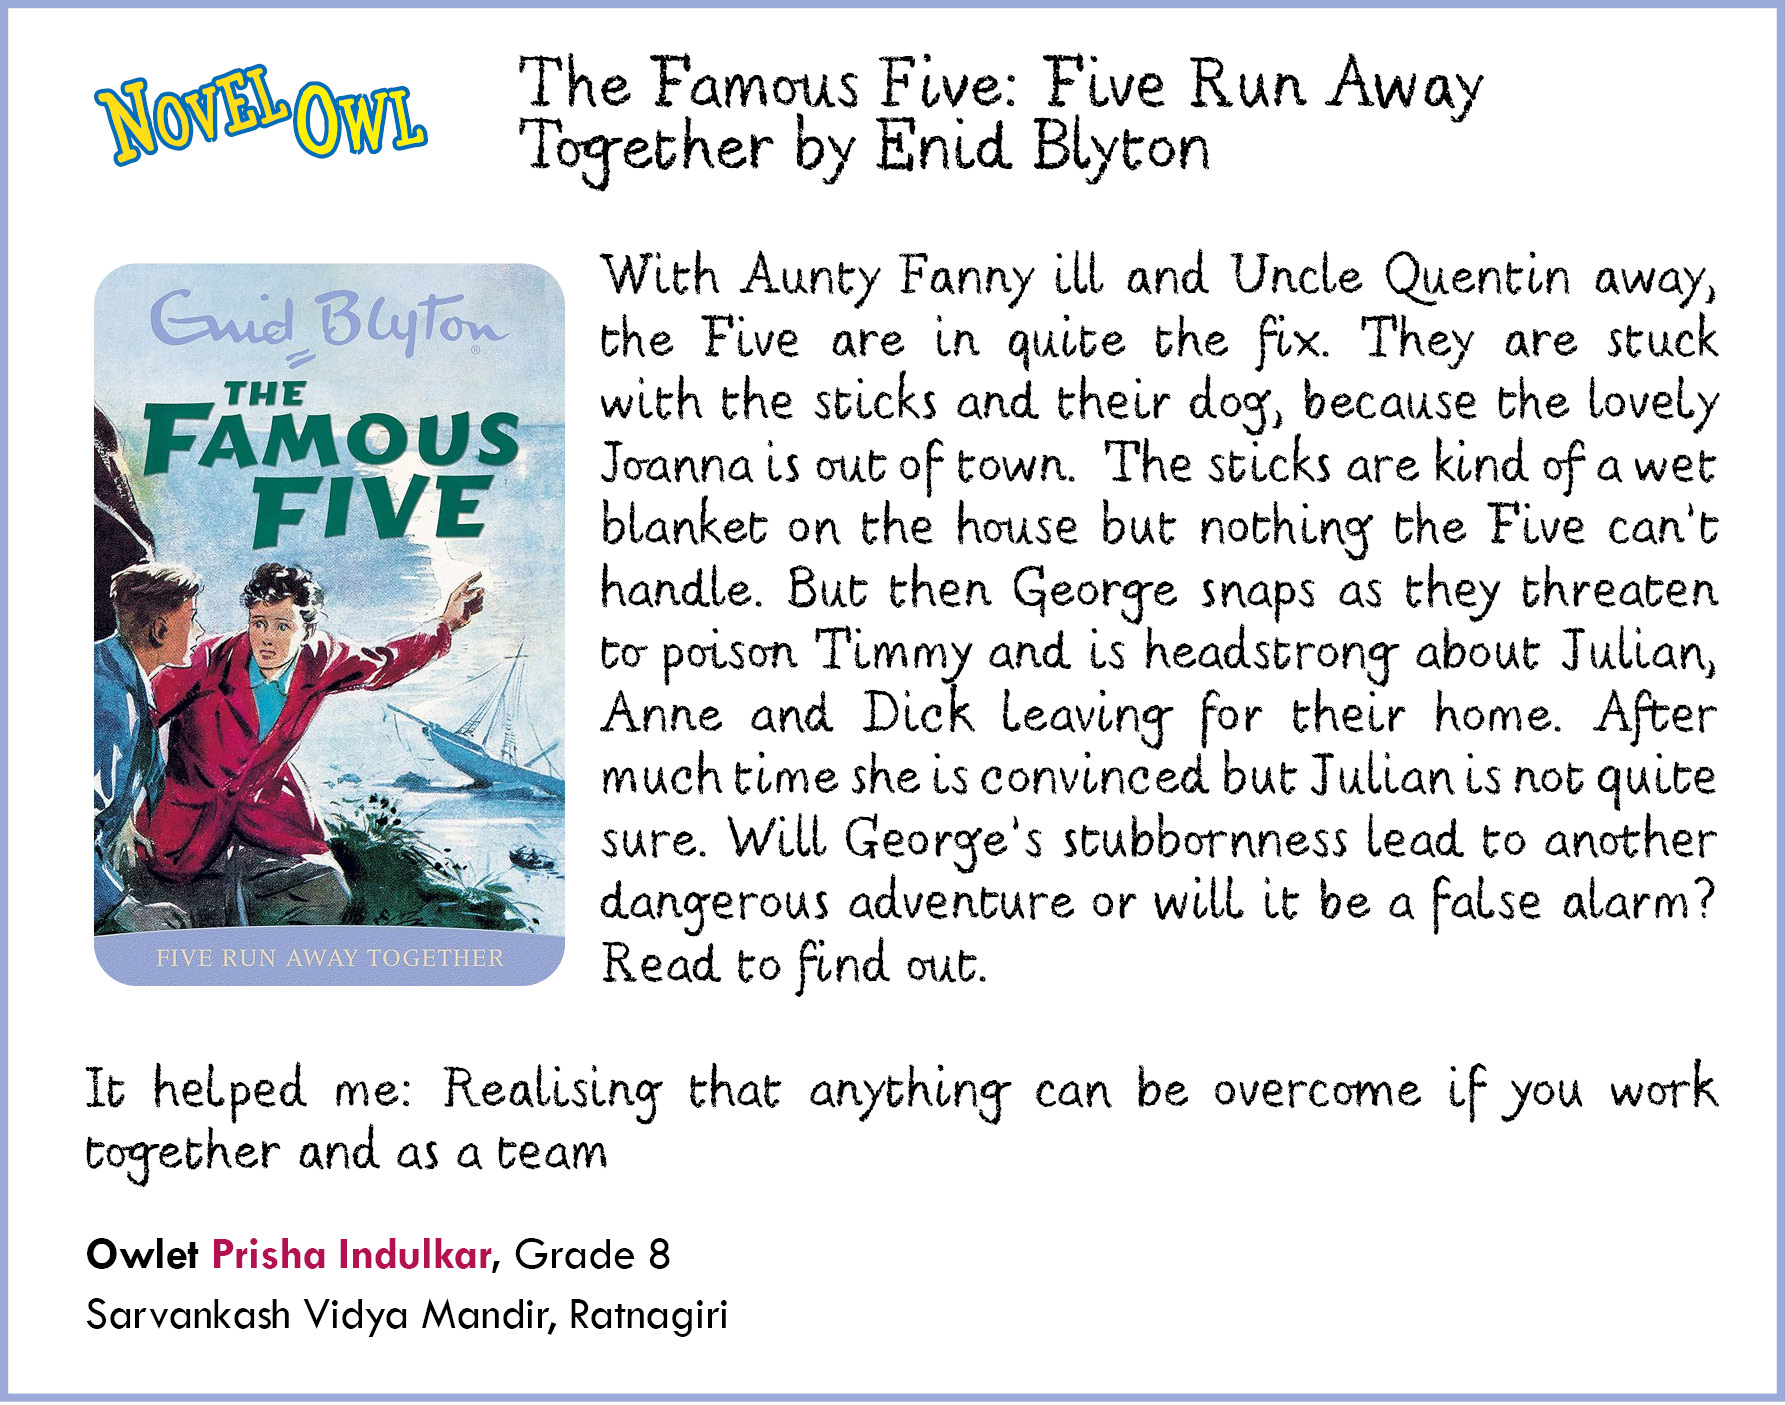 The Famous Five: Five Run Away Together by Enid Blyton